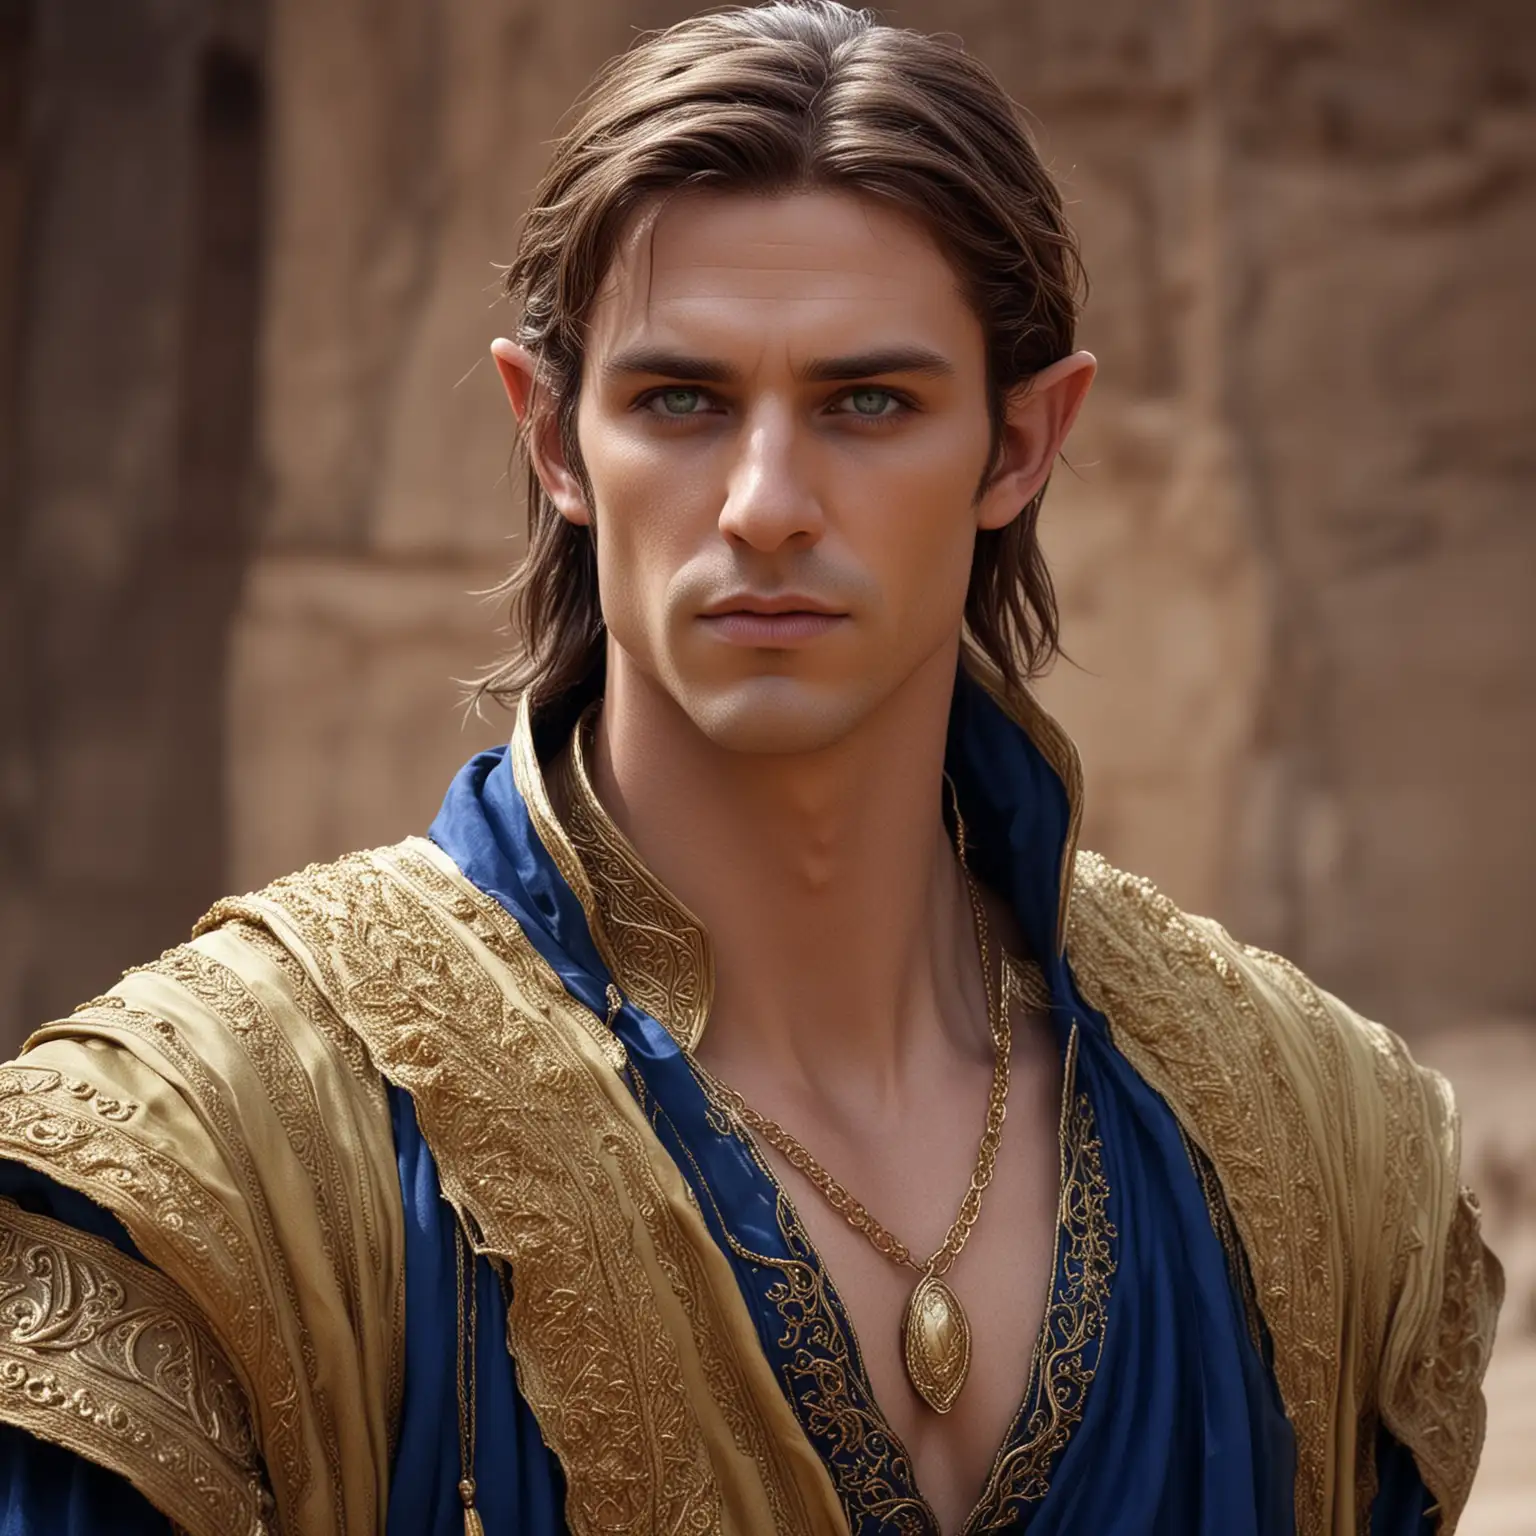 Fantasy male elf, seven feet tall, thirty years old, muscular, sad eyes, strong jaw, rugged, pale green eyes, sexy, hot, sexy royal blue and gold desert robes, gold accessories, royal, noble, desert palace, short chestnut brown hair, longer hair on top, rugged, god like